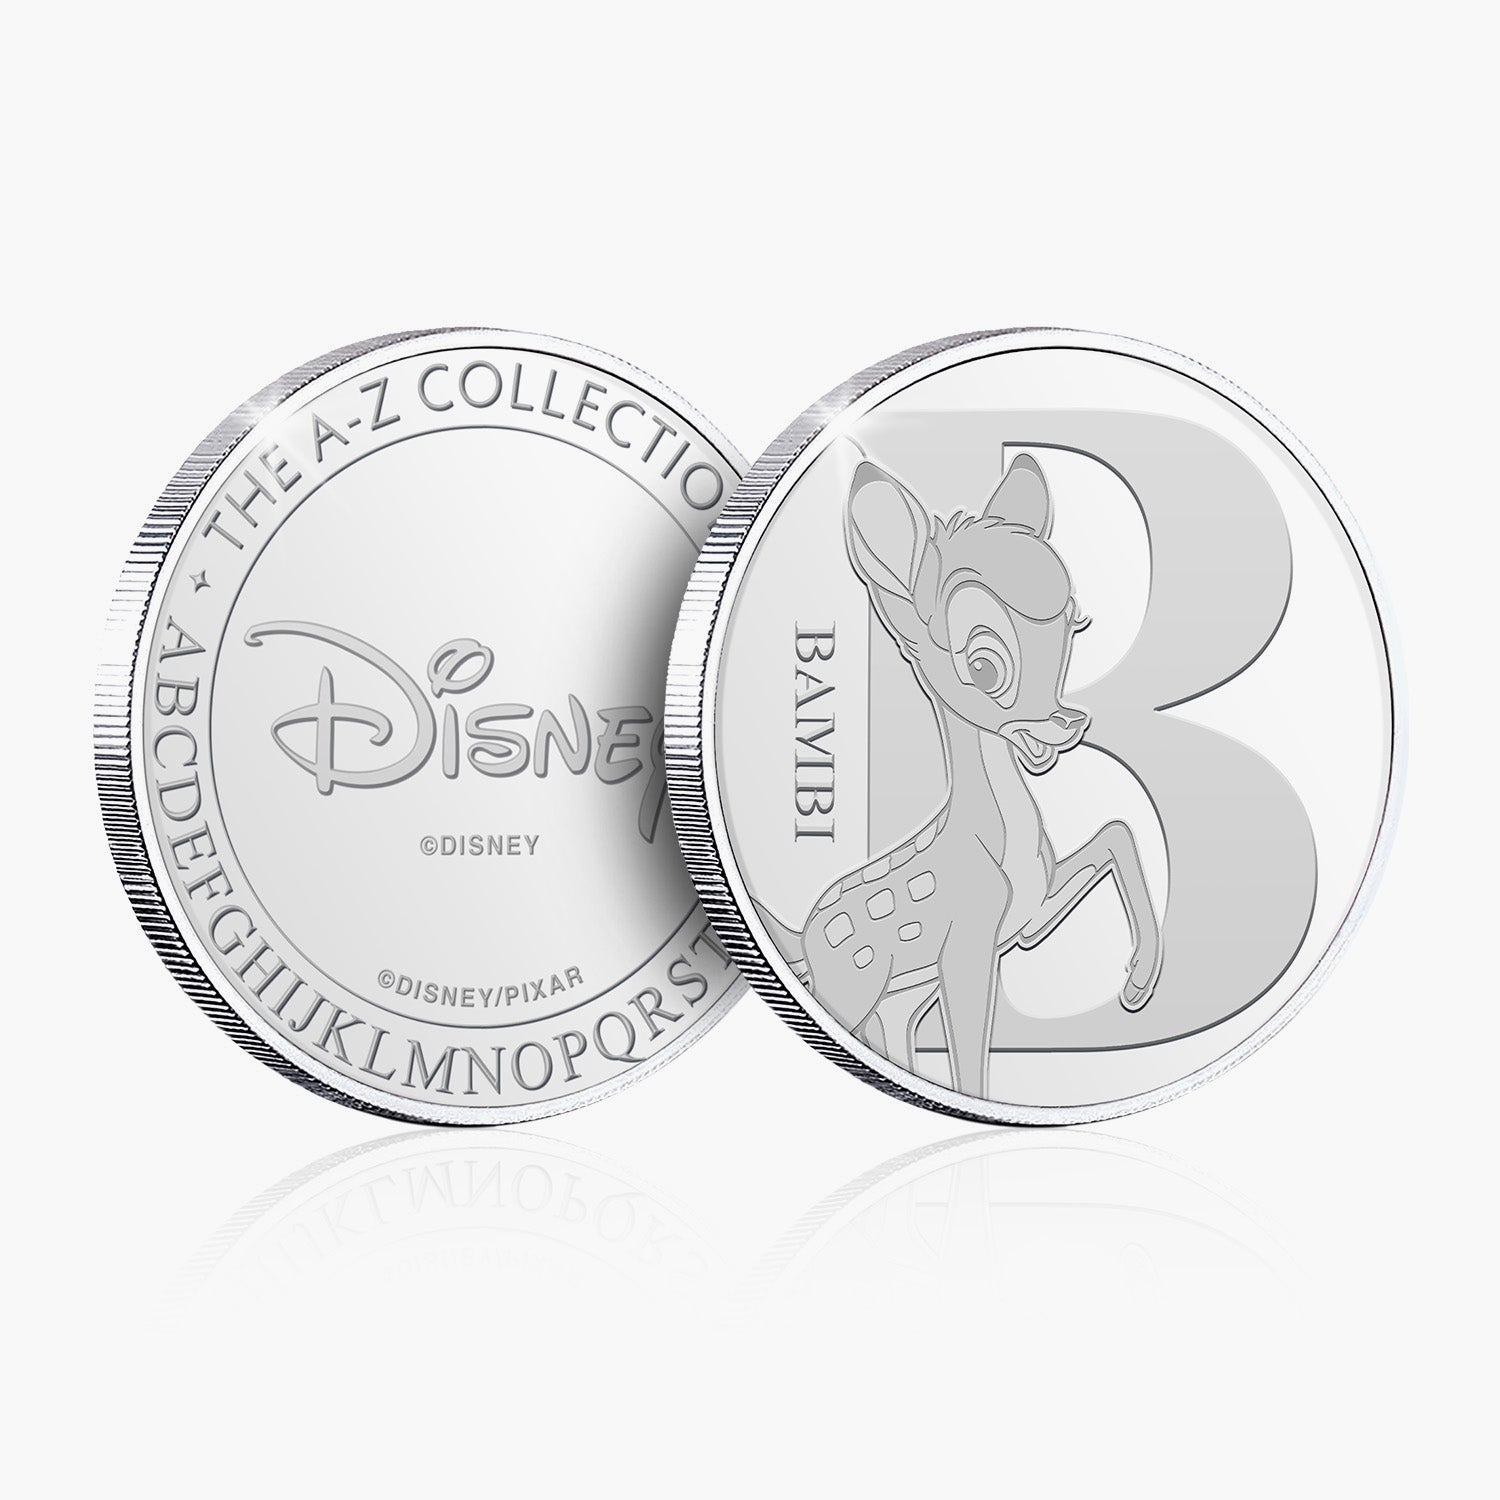 B is for Bambi Silver-Plated Commemorative